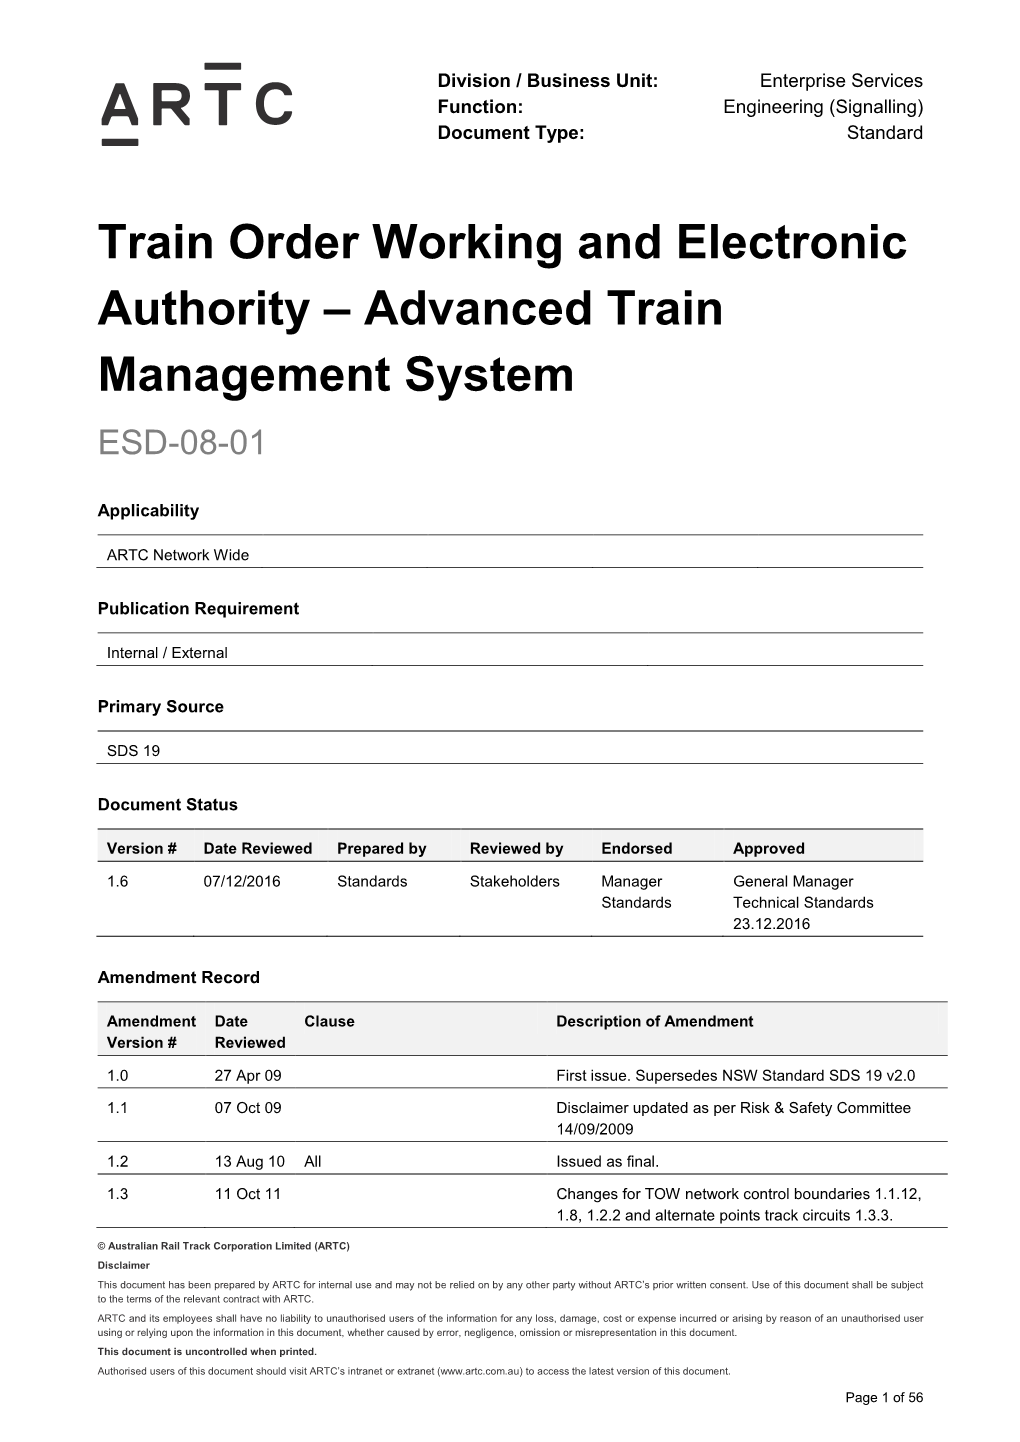 ESD-08-01. Train Order Working and Electronic Authority